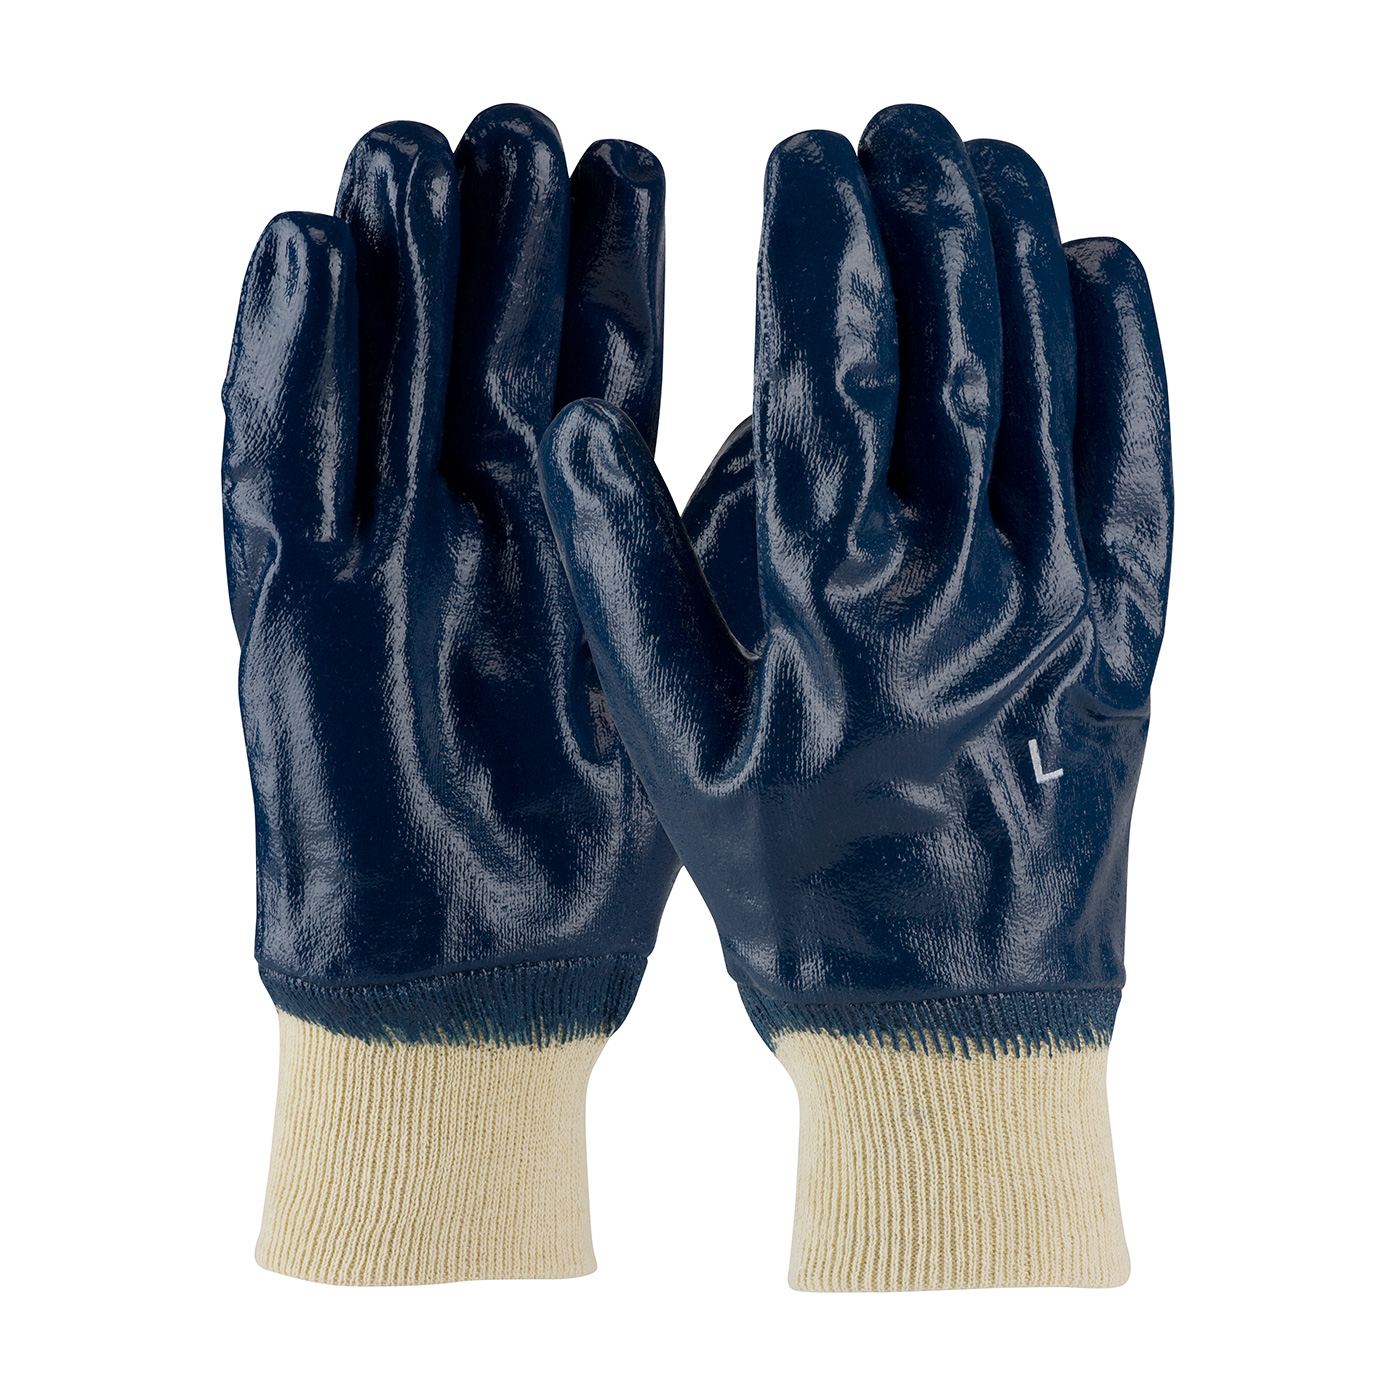 56-3152 PIP® ArmorGrip® Jersey Lined Full Nitrile Dipped Glove with Smooth Grip Texture and Knit Cuff